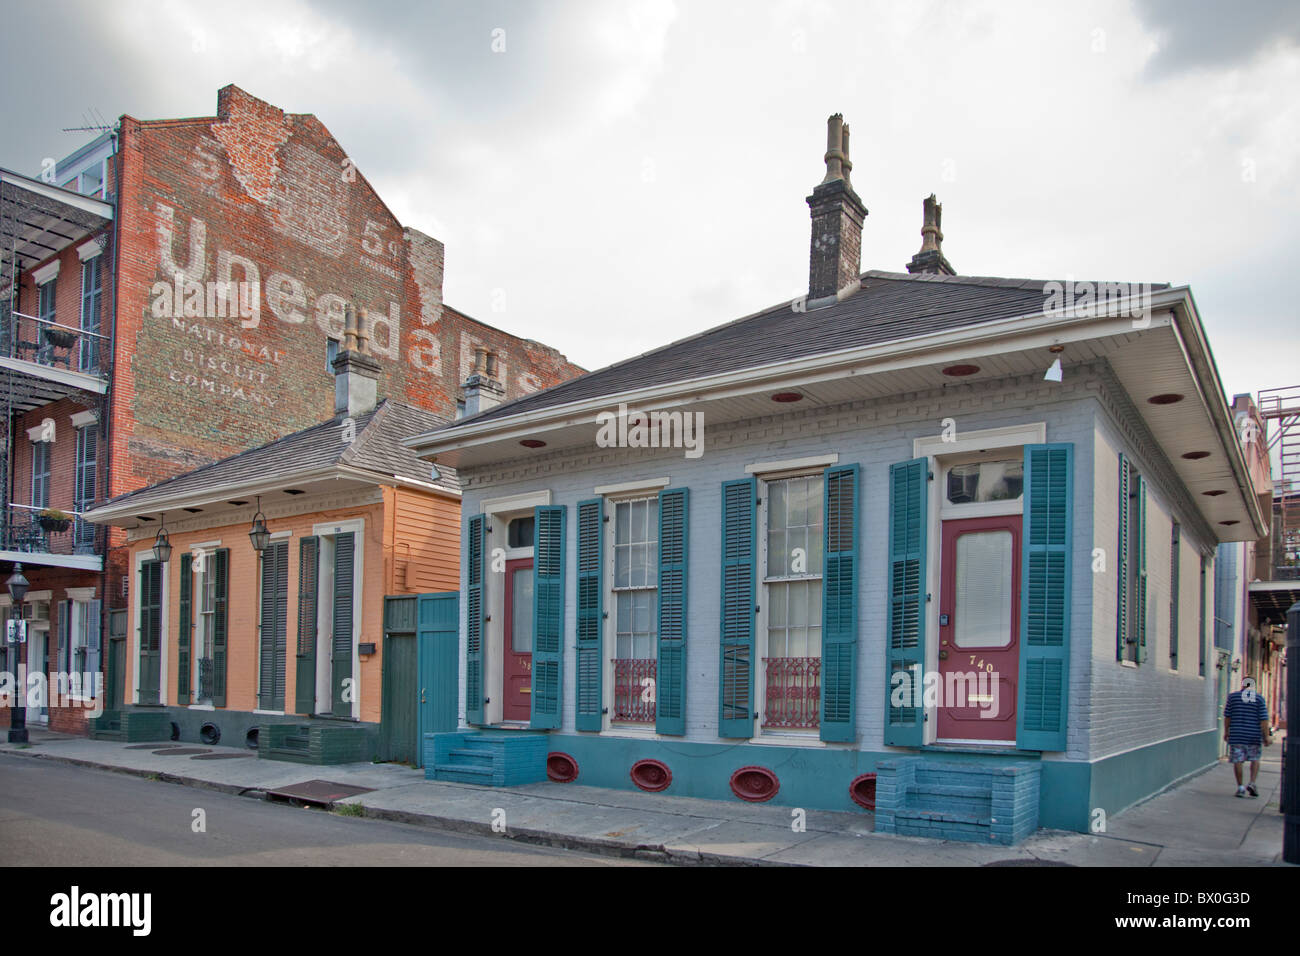 The Spanish-style architecture of the French Quarter of New Orleans, Louisiana dates back hundreds of years to the 1700s. Stock Photo